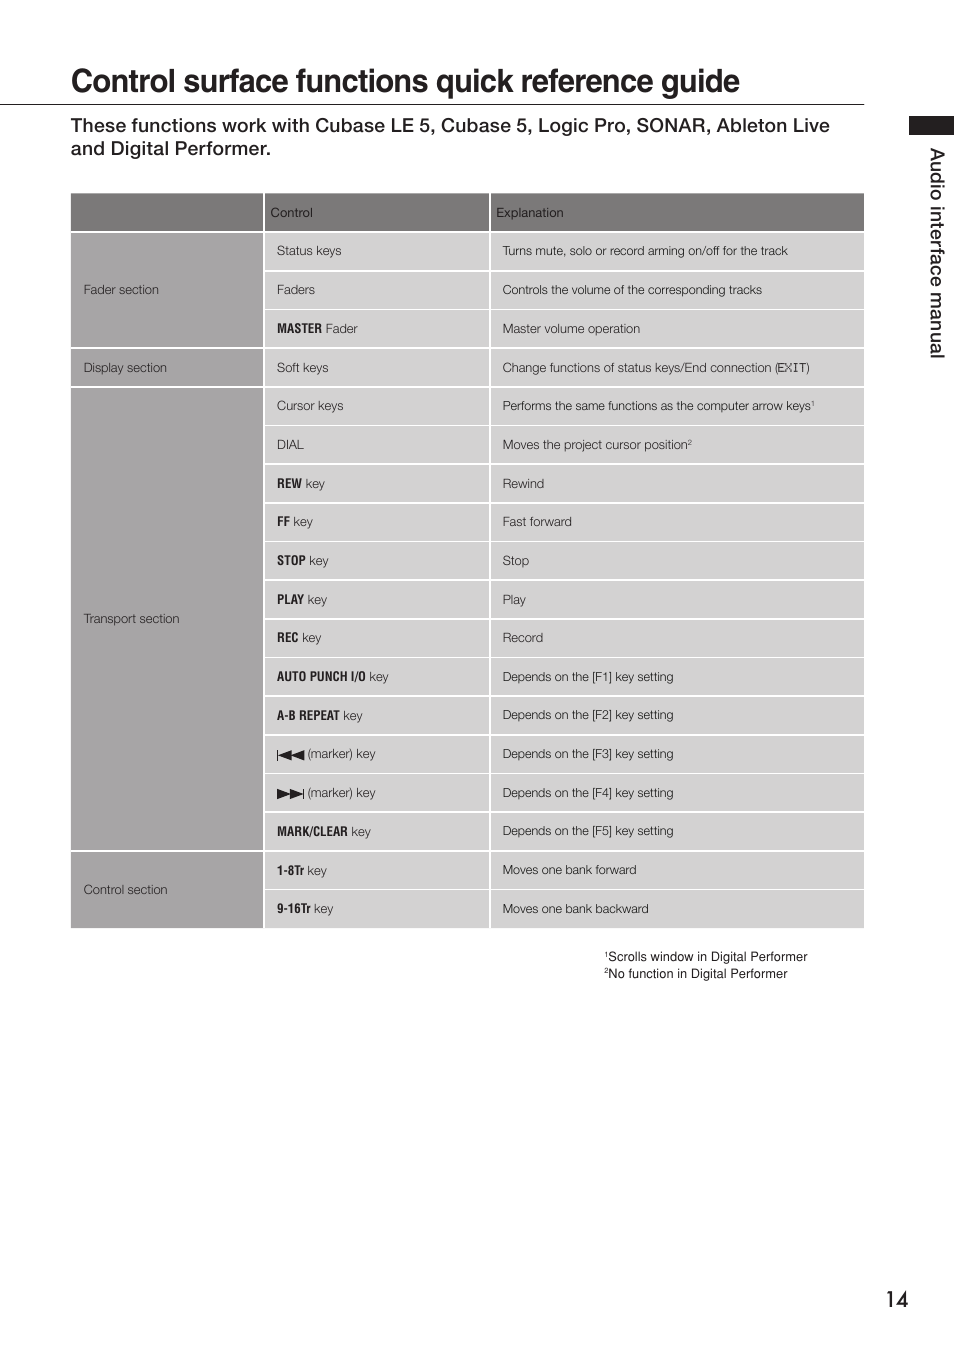 Control surface functions quick reference guide, Au d io i nt er fa ce